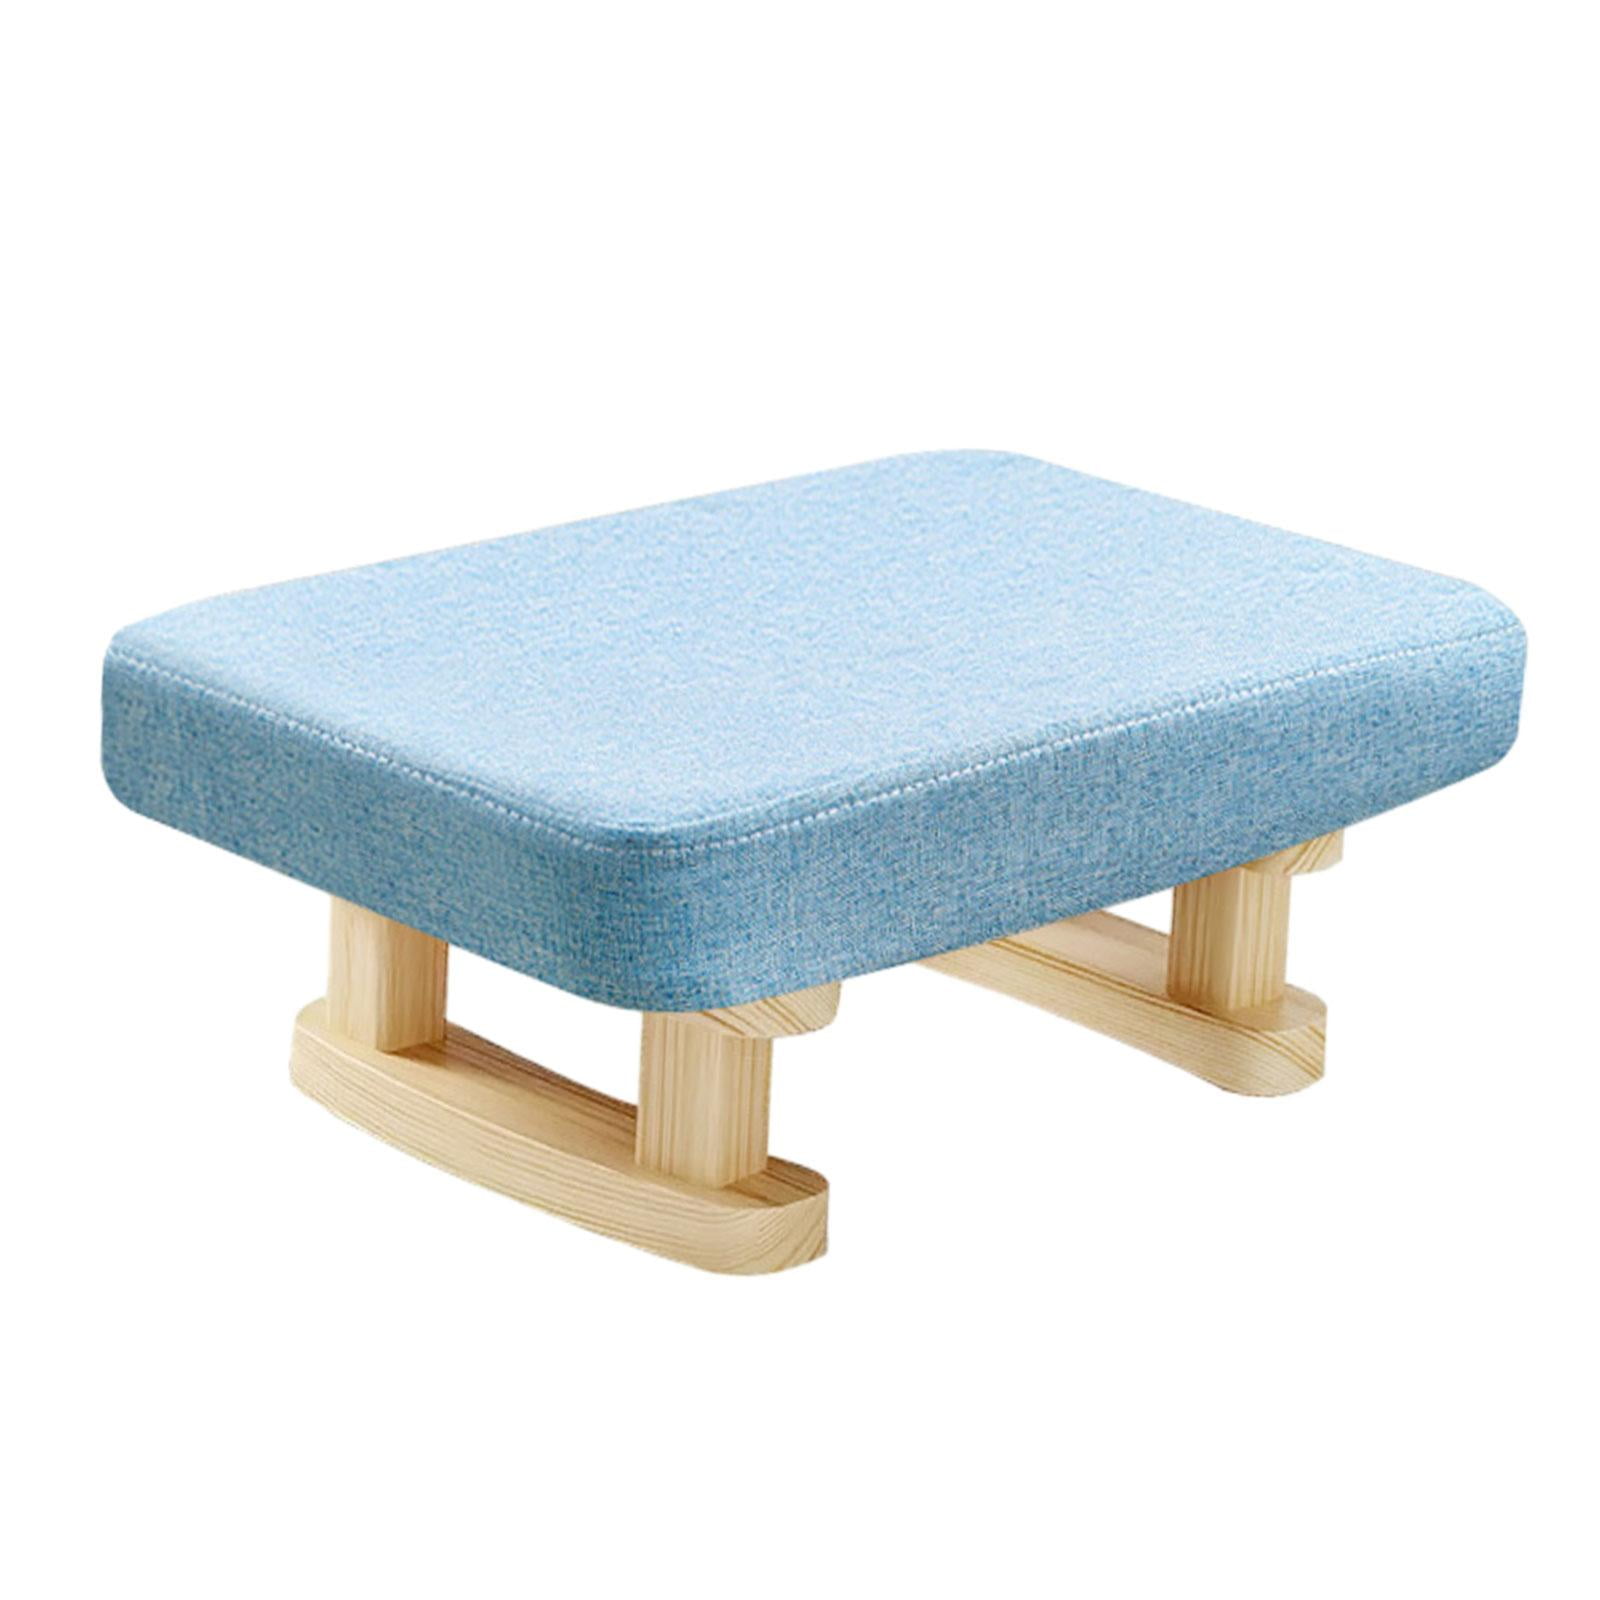 Small Footstool Foot Rest with Wooden Legs, Rectangle Chair Step Stool  Padded Foot Stool Small Ottoman for Guest Room Bedroom Blue 